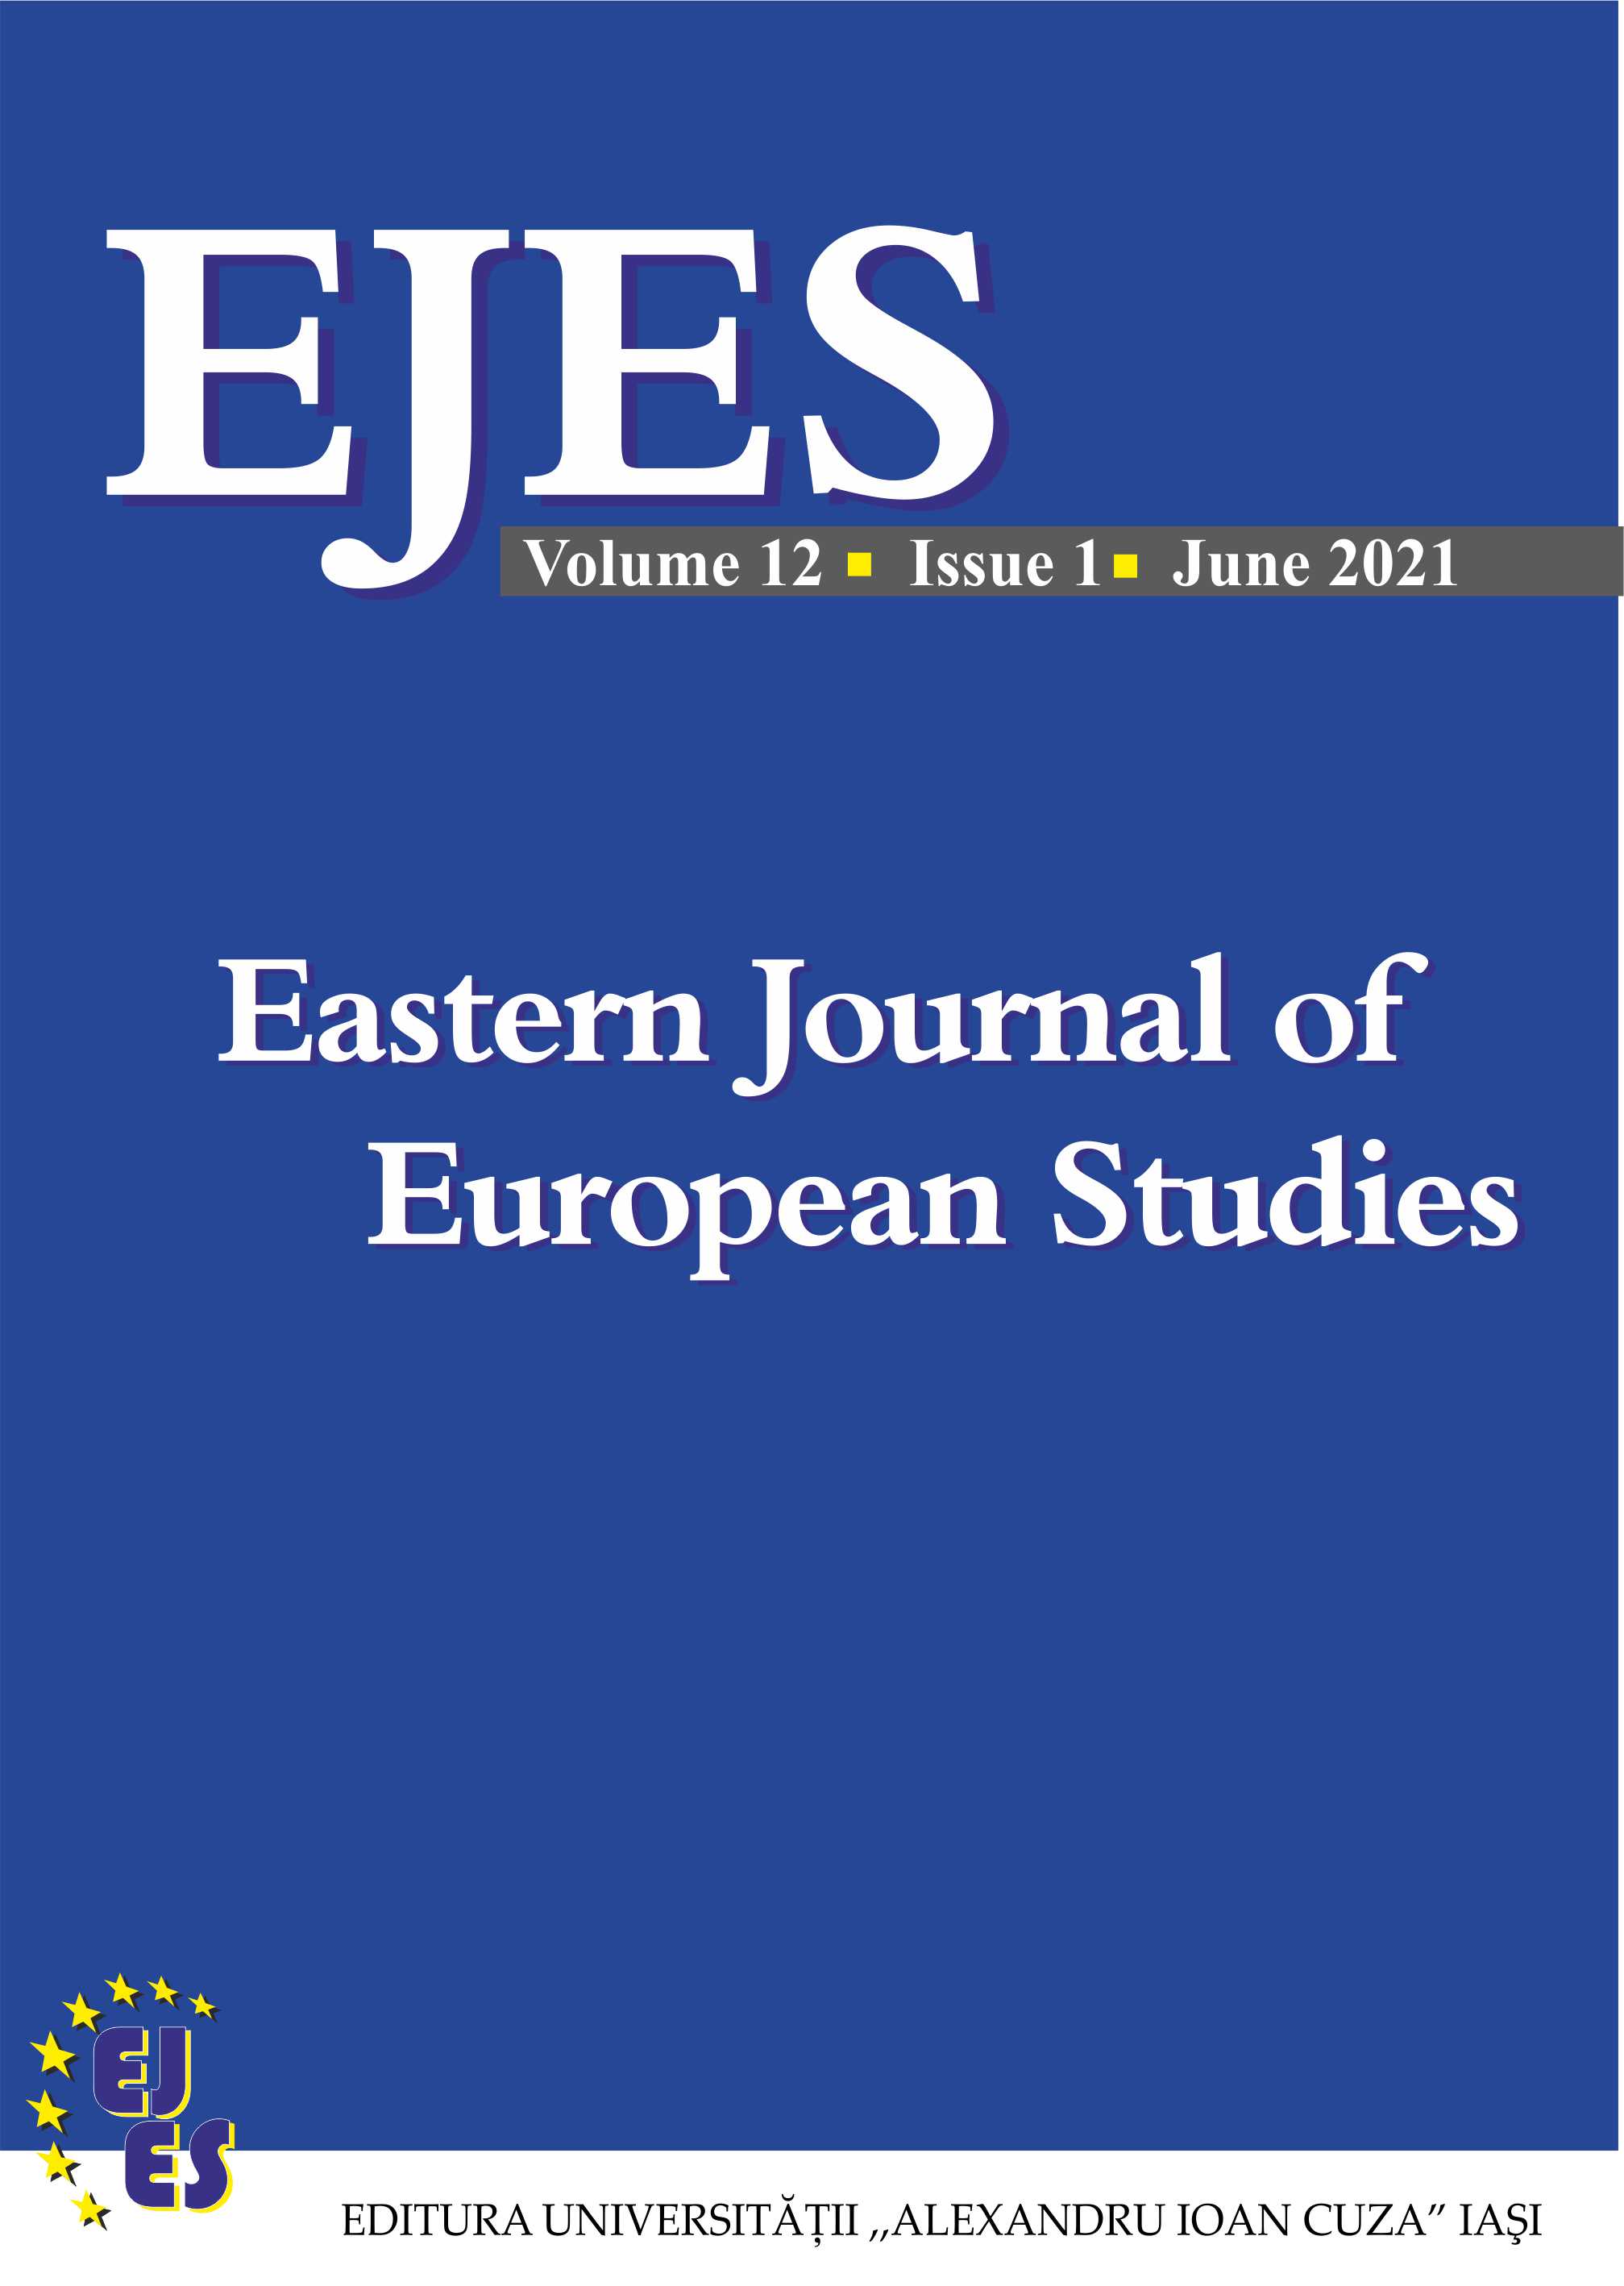 The practices and corporate governance frameworks: comparative evidence from south-eastern European countries